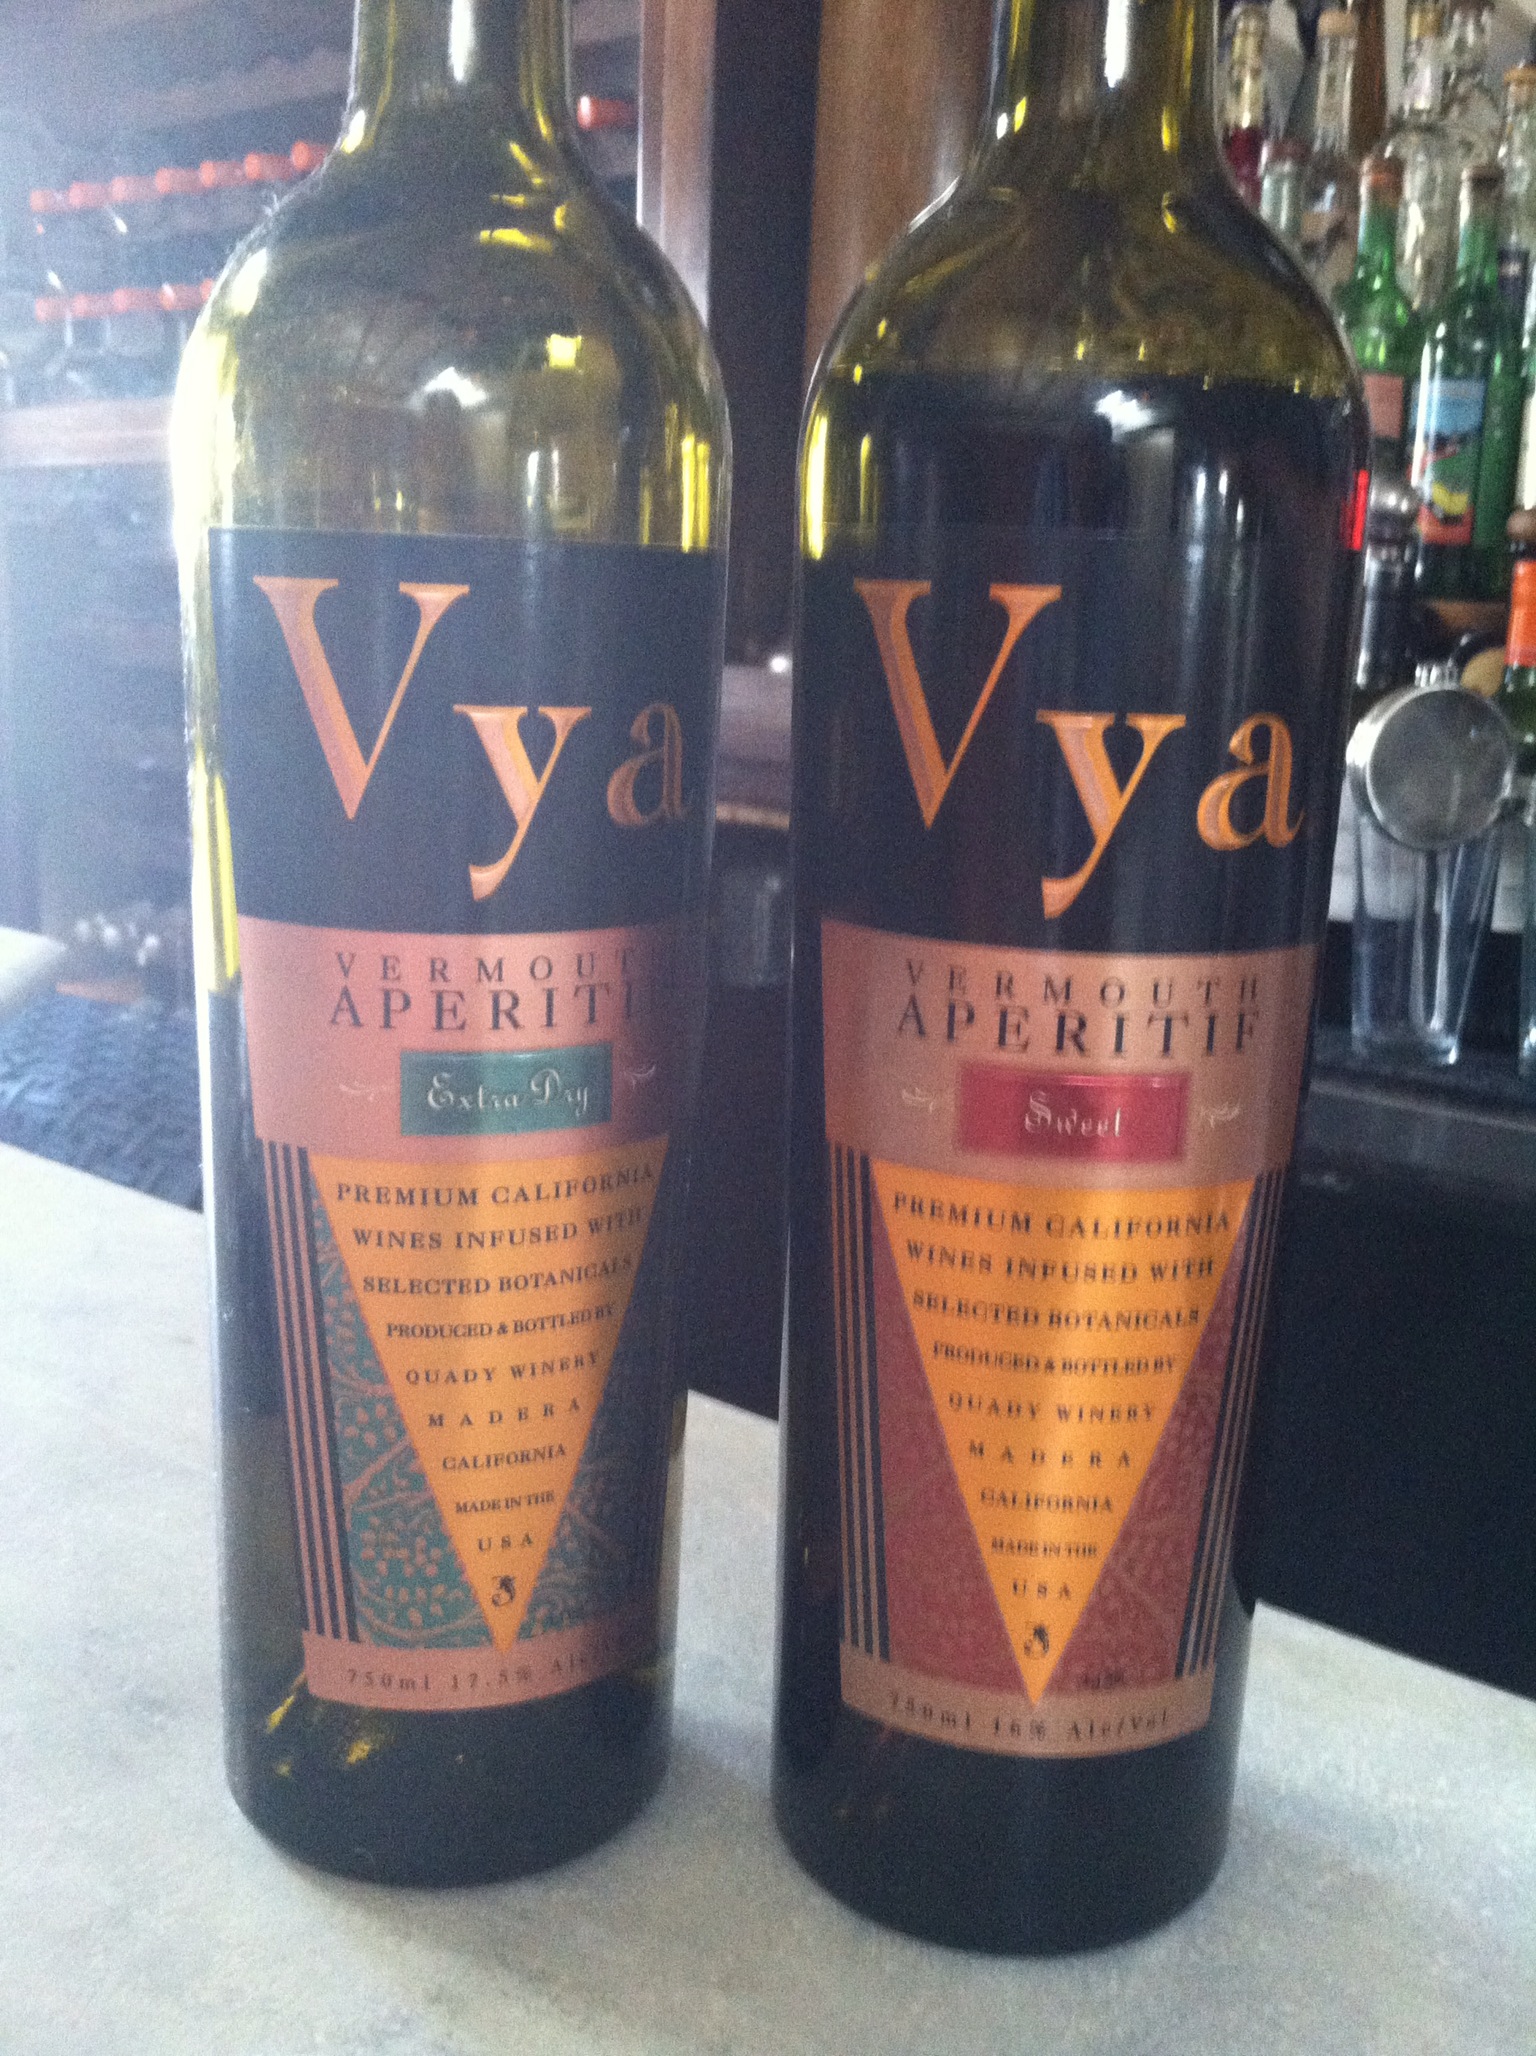 Vya Vermouth is from California, too